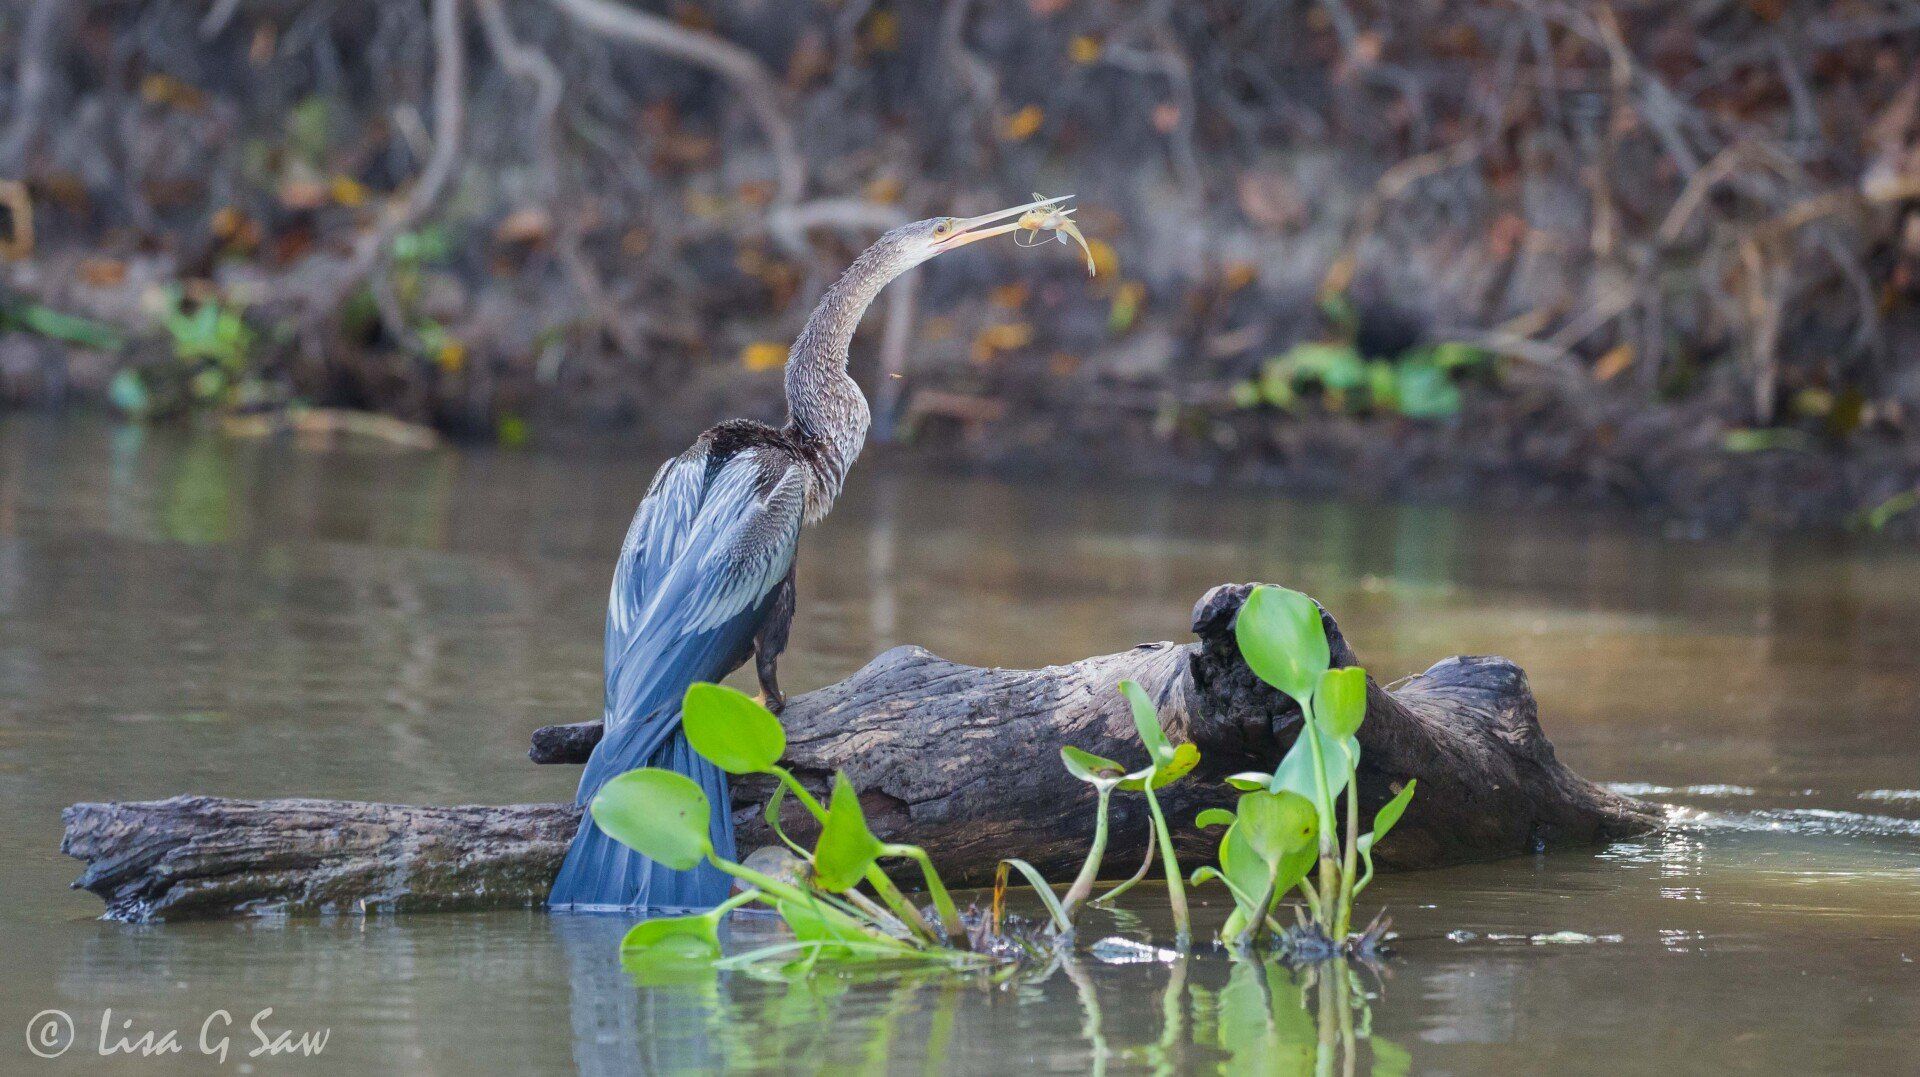 Anhinga (Darter) with a fish in its mouth